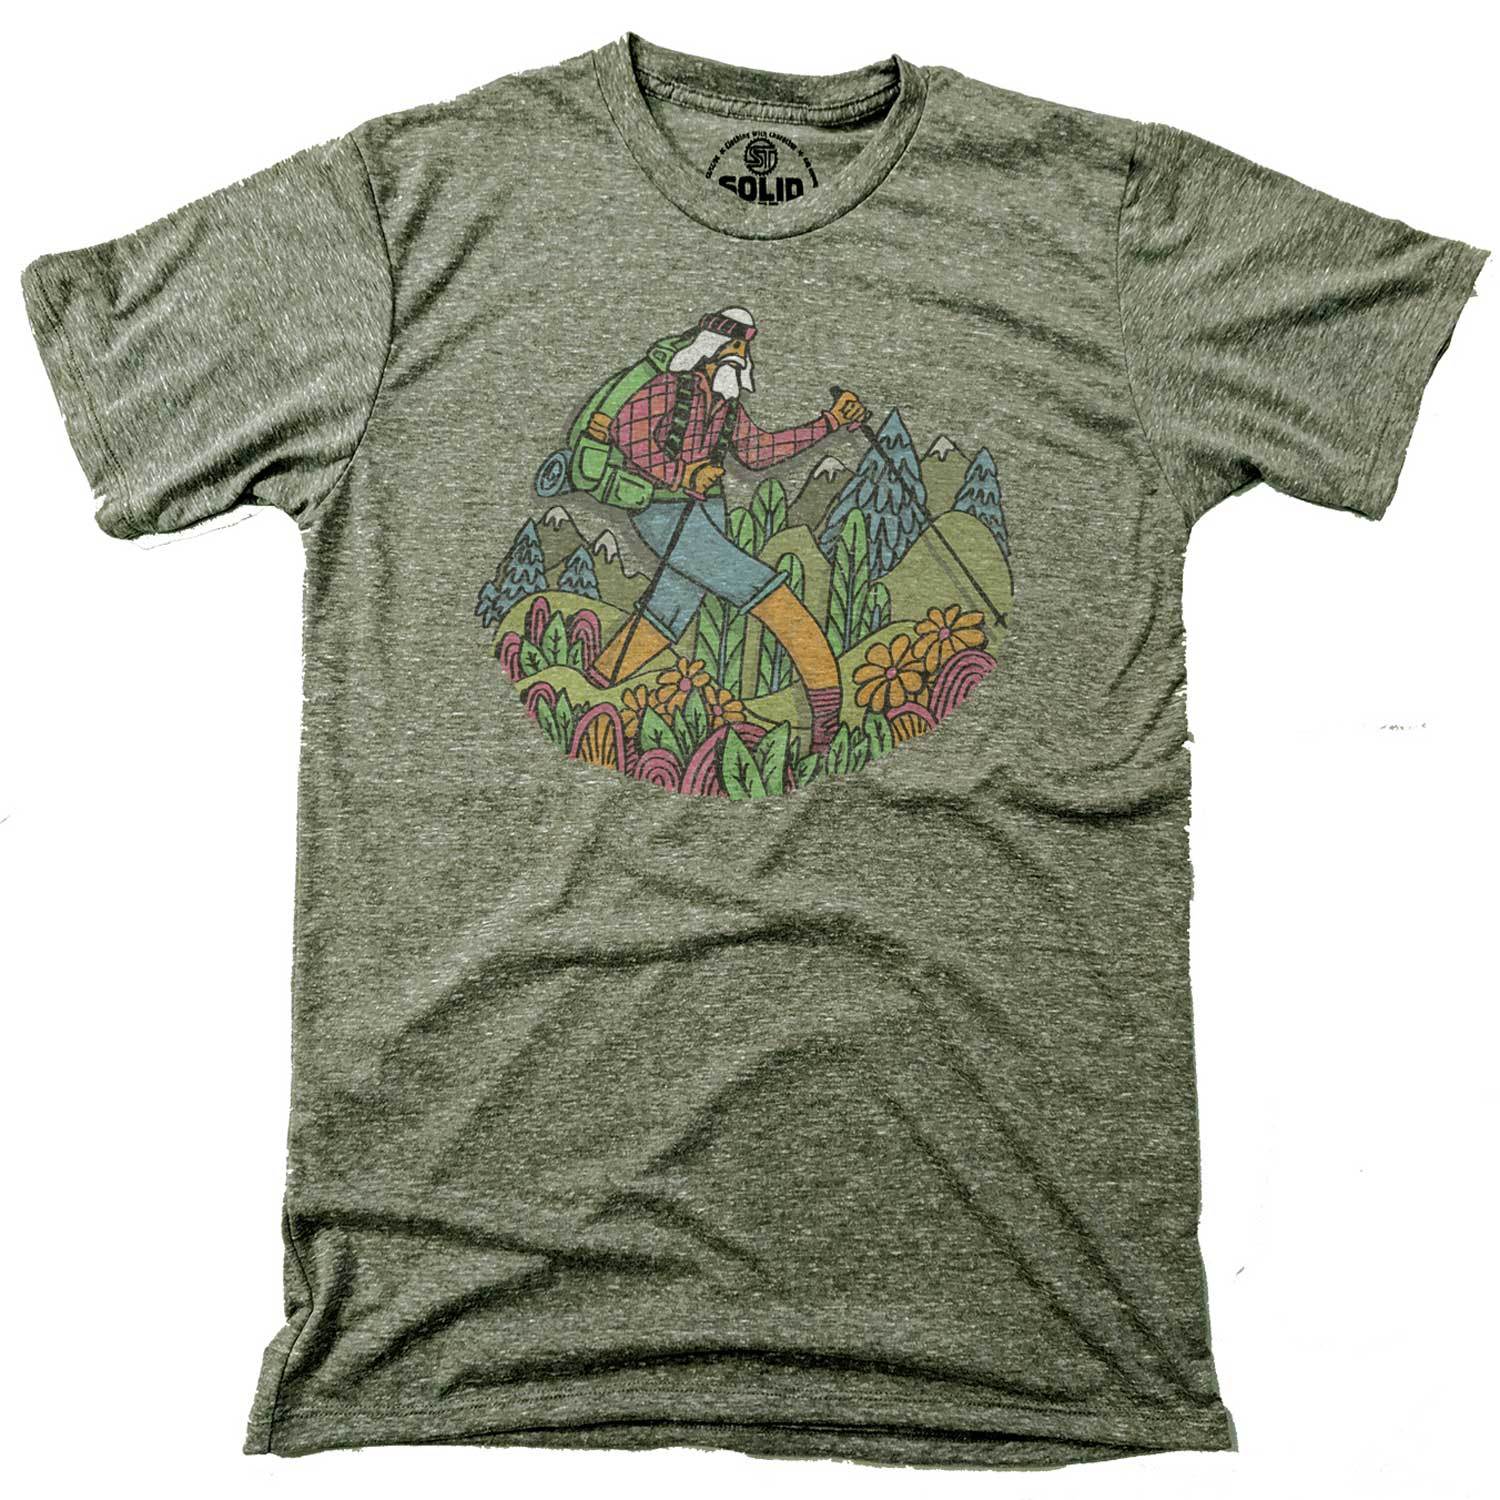 Men's Vintage Artsy Mountains Wise Hiker Graphic Tee | Retro Outdoorsy T-shirt | Solid Threads